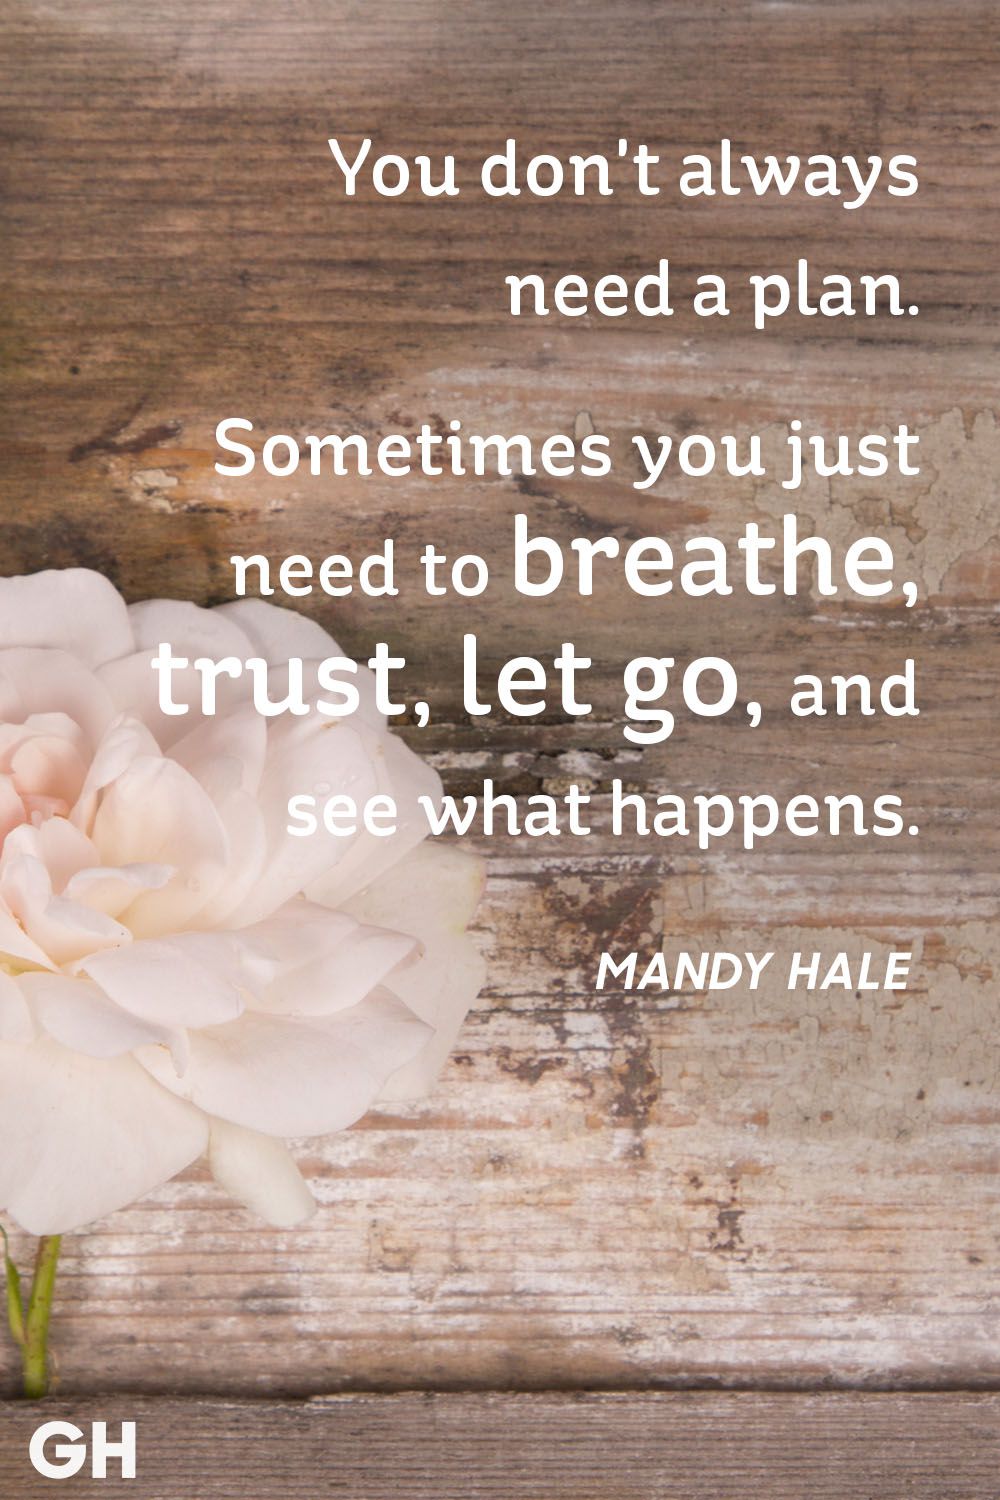 You don’t always need a plan. Sometimes you just need to breathe, trust, let go, and see what happens. Mandy Hale